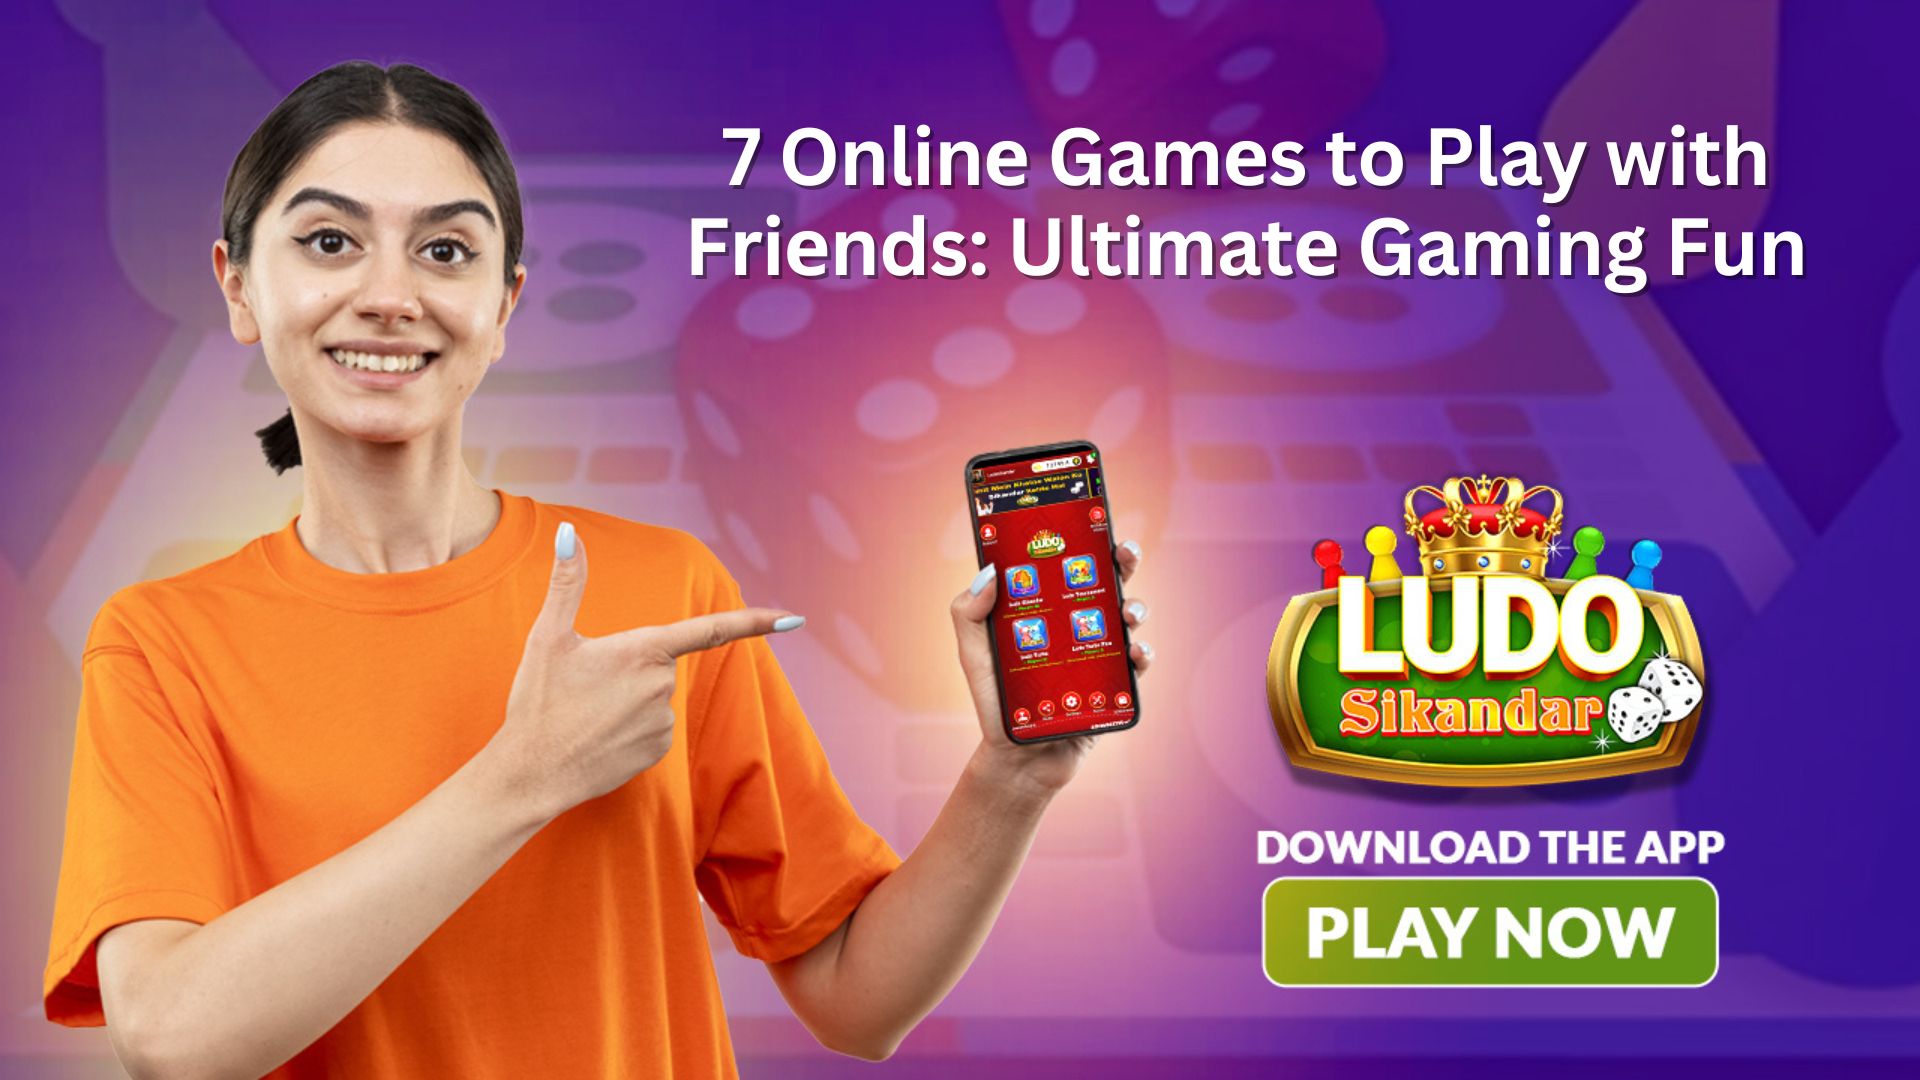 7 Onlinе Gamеs to Play with Friеnds: Ultimatе Gaming Fun